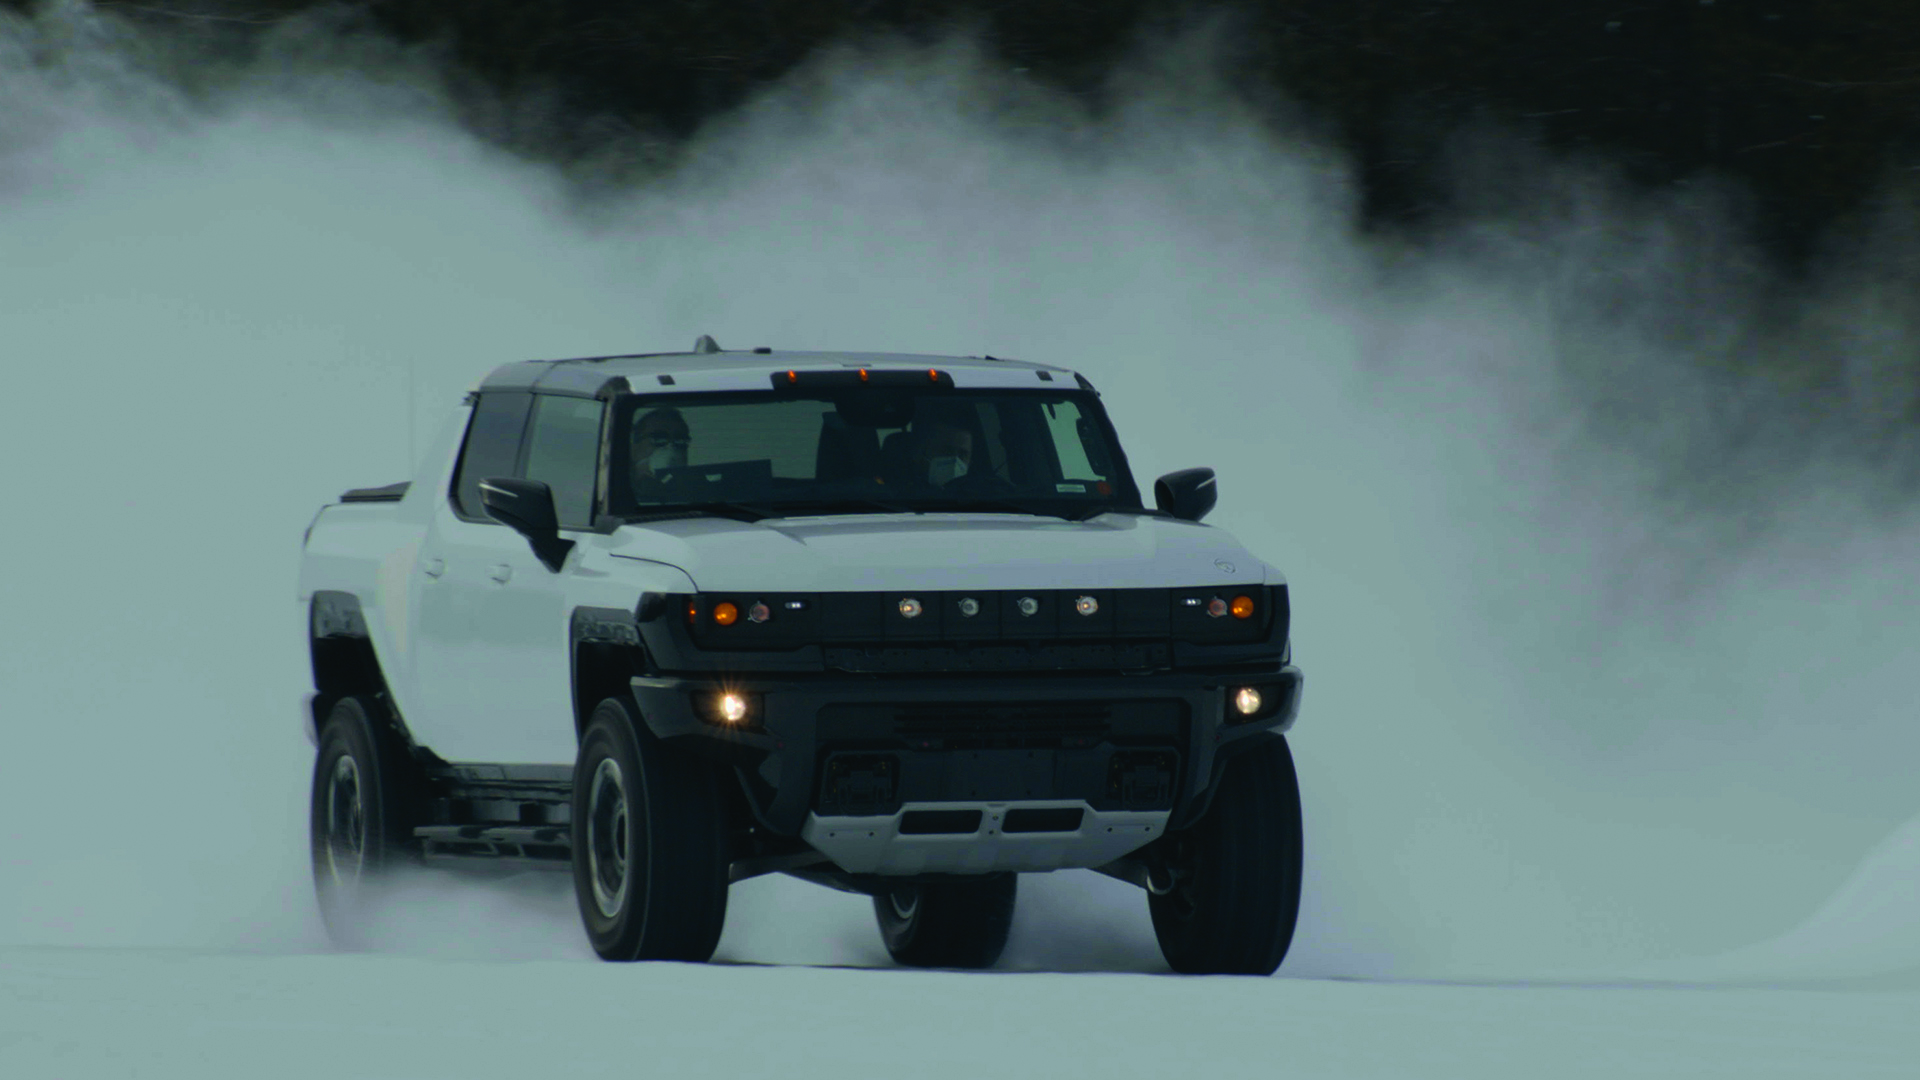 Key cold-weather tests done in the winter of 2020/2021 on Michigan’s Upper Peninsula included integrating the Hummer’s all-wheel-drive torque distribution with the traction control system, as well as calibration and testing